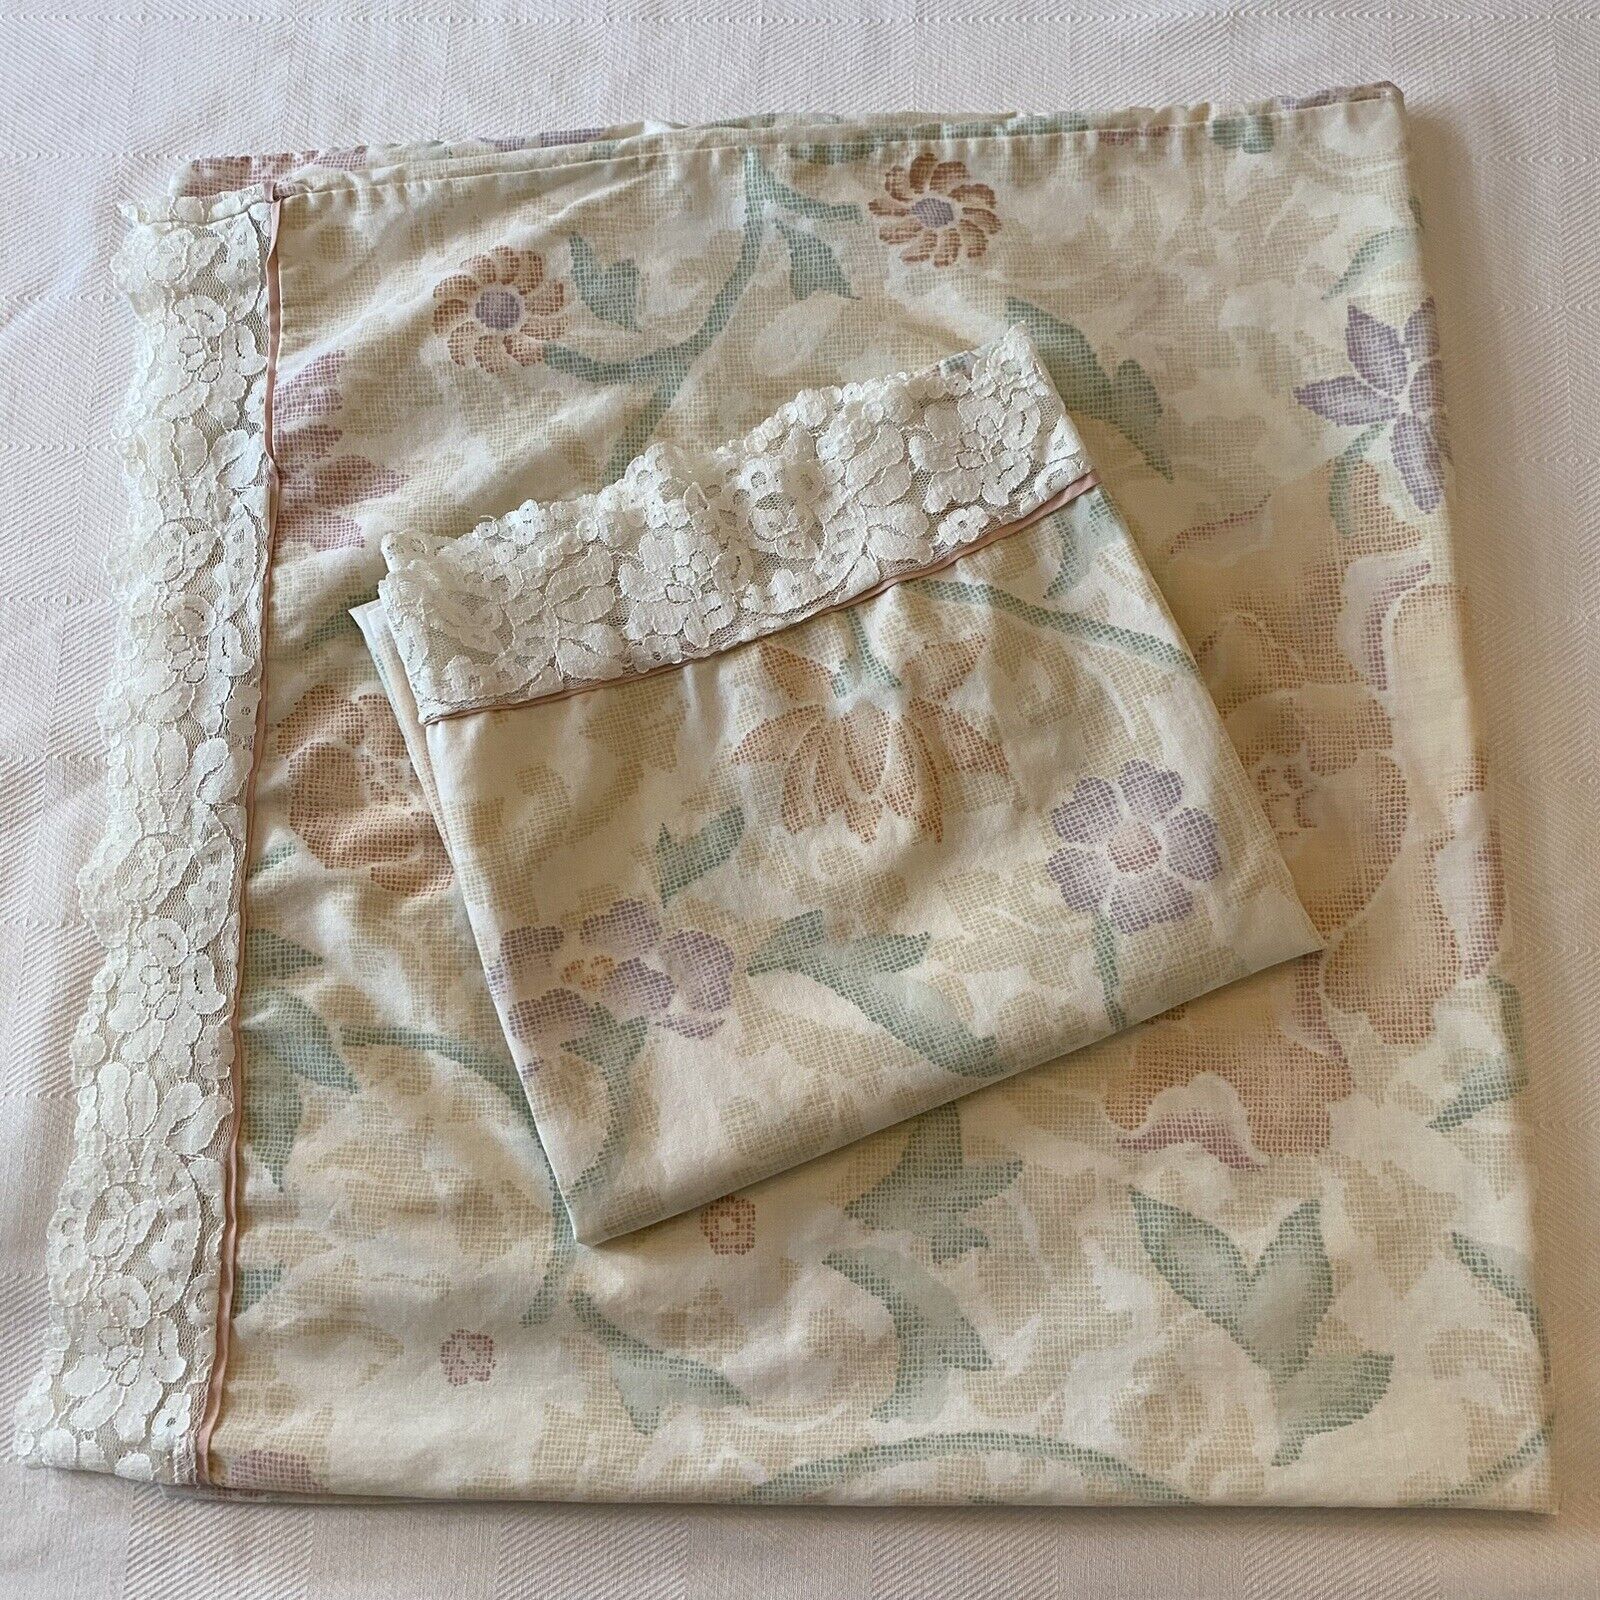 Vtg Martex Pillowcases King SET 2 Floral LACE Hampshire Percale Sheri Roese